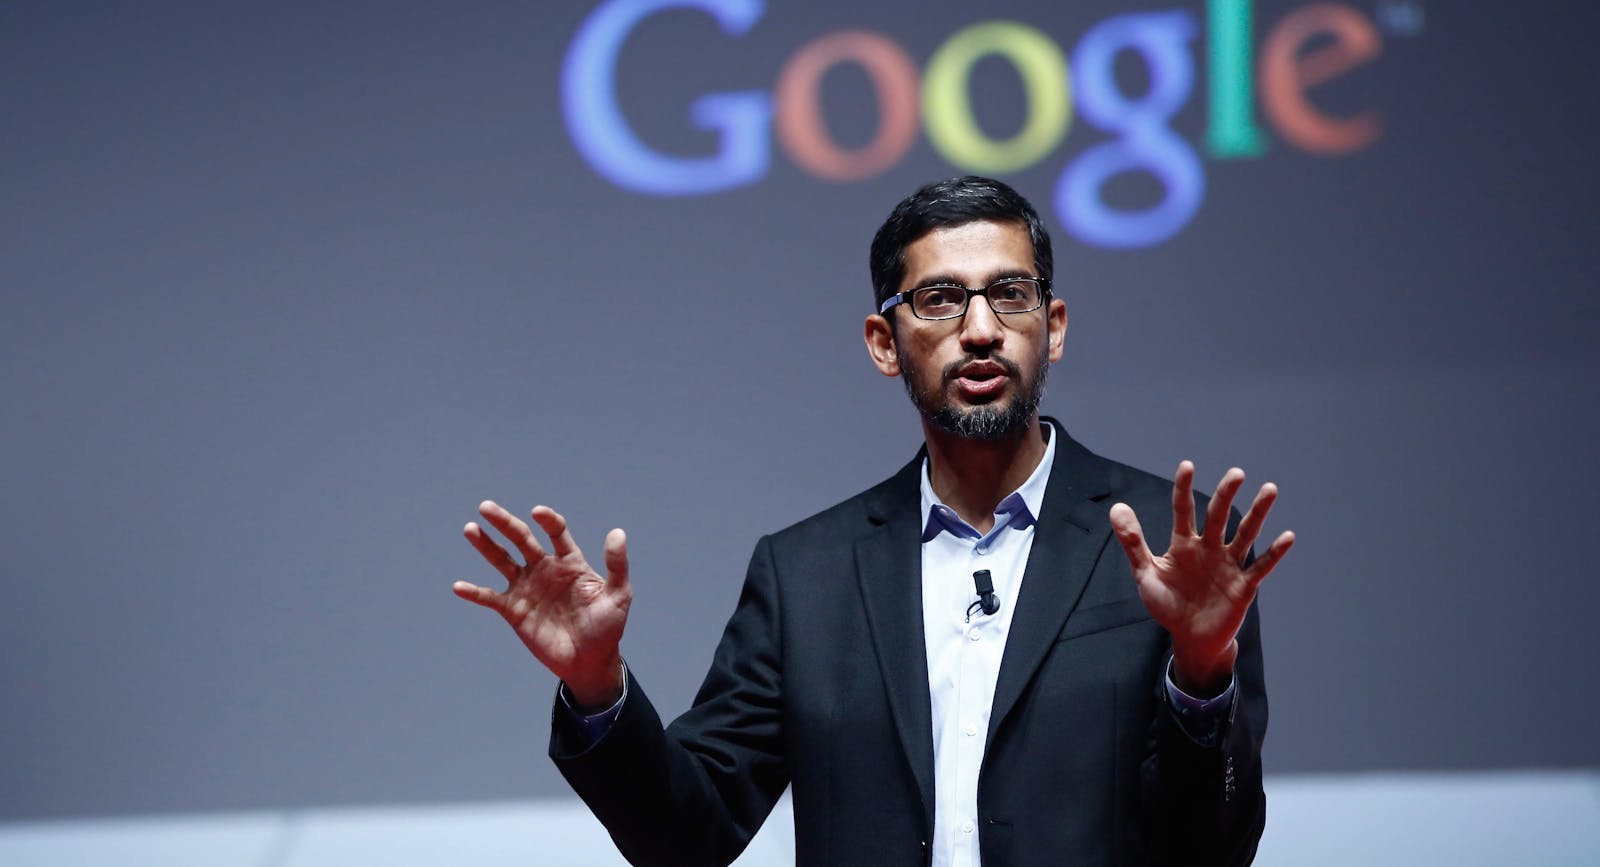 Google SVP Sundar Pichai, who oversees Android and Google Play. Photo by Bloomberg.